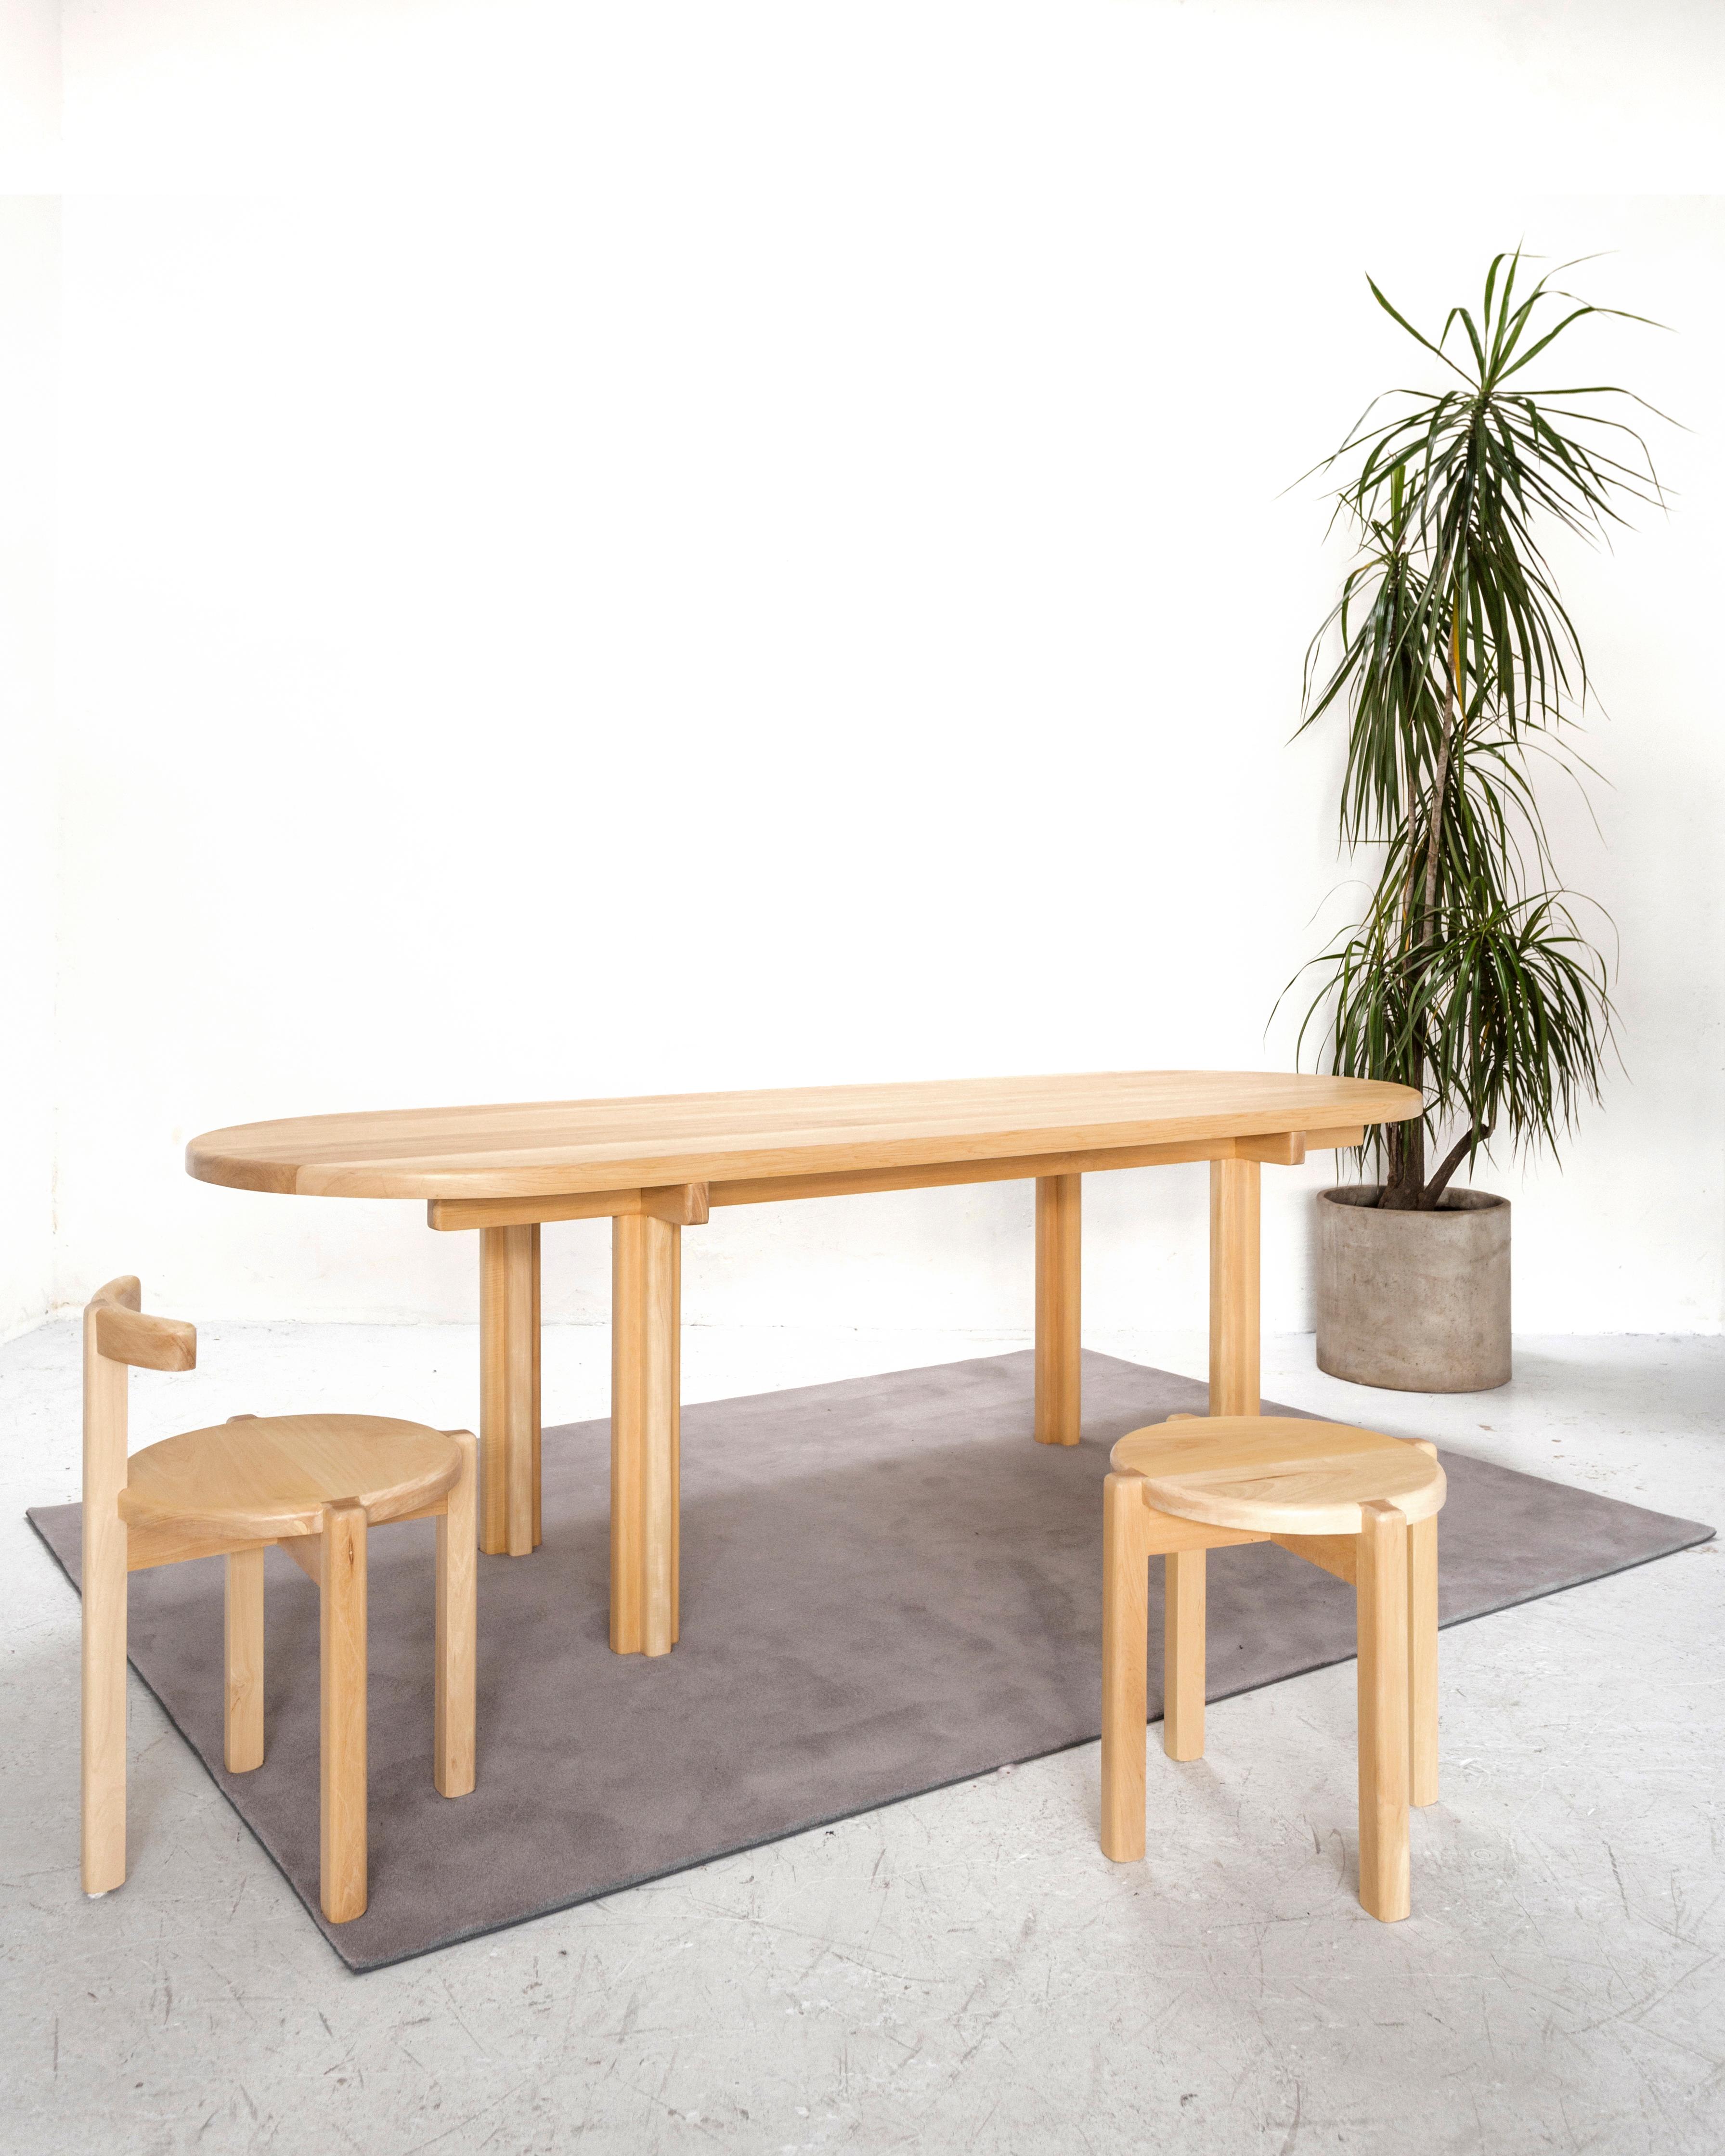 A set of orno dining table & 2 chairs by Ries
Dimensions: W 220 x D 80 x H 73 cm (table)
D 44 x H 63 cm (chair)
Materials: Hardwood
Transparent matte lacquer, color matte lacquer (Finishings)

Ries is a design studio based in Buenos Aires,